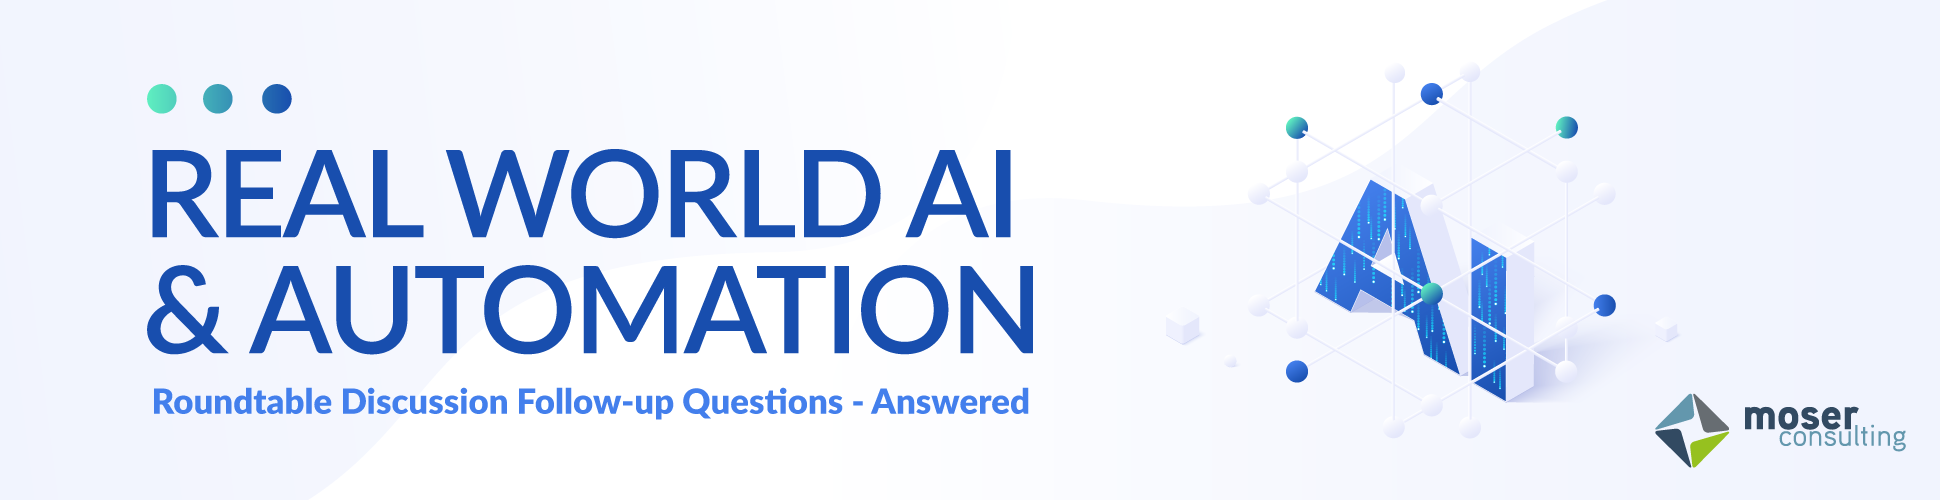 Real World AI & Automation: Roundtable Discussion Follow-up Questions Answered